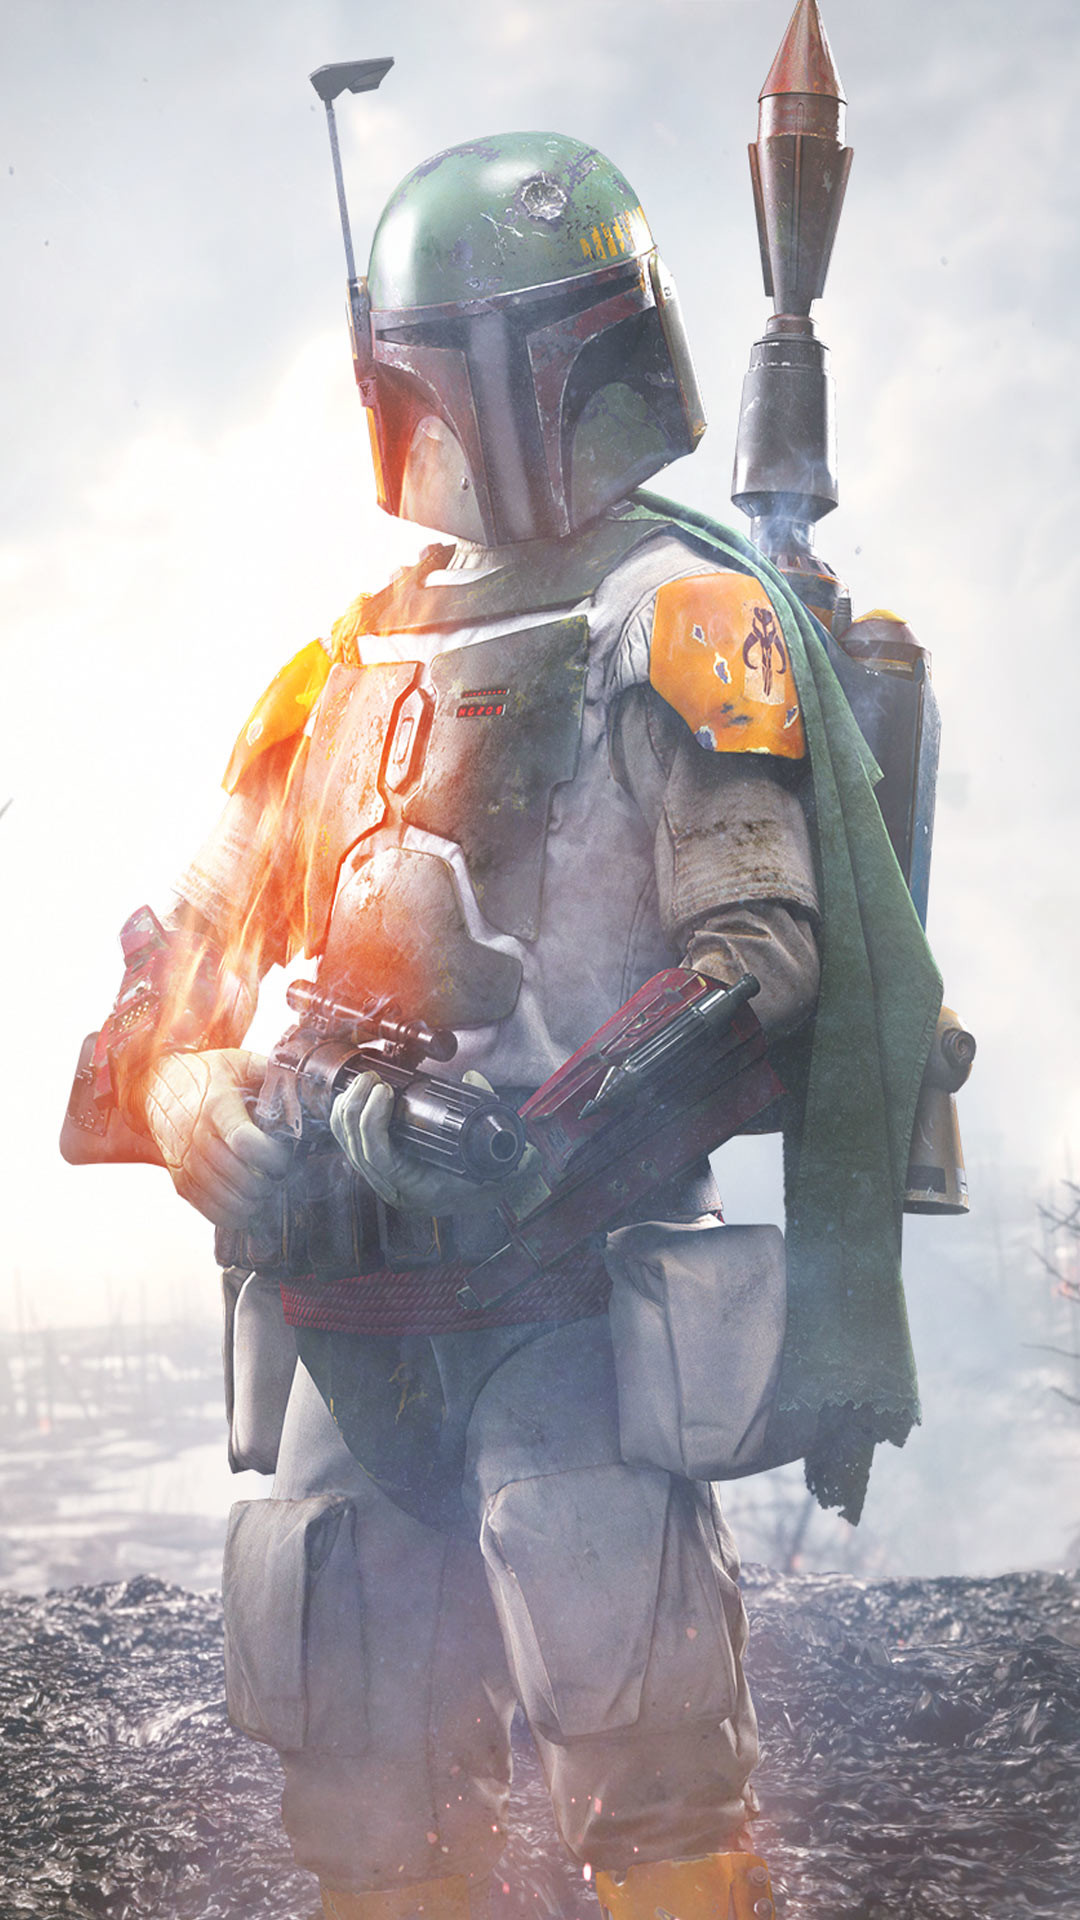 1080x1920 Free Star Wars Boba Fett, computer desktop wallpapers, pictures, images